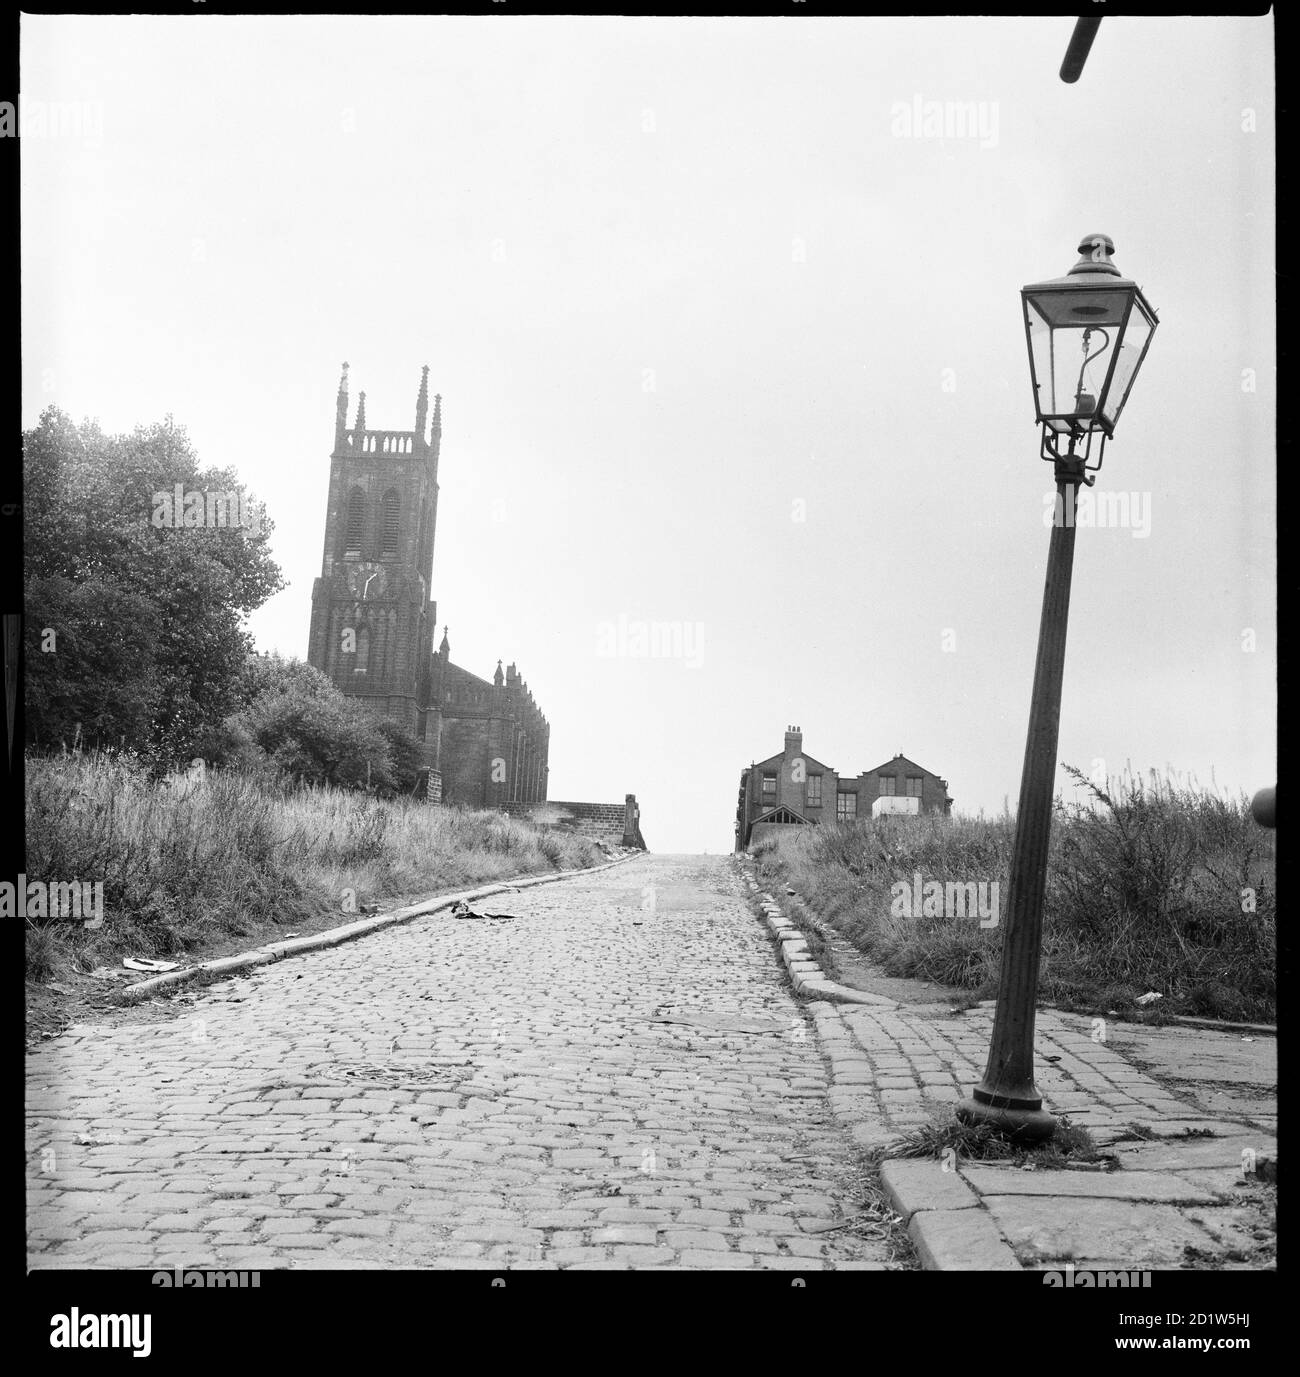 A view looking along St Mary's Street towards St Mary's Church with a lamp post in the foreground, Quarry Hill, Leeds, UK. Stock Photo